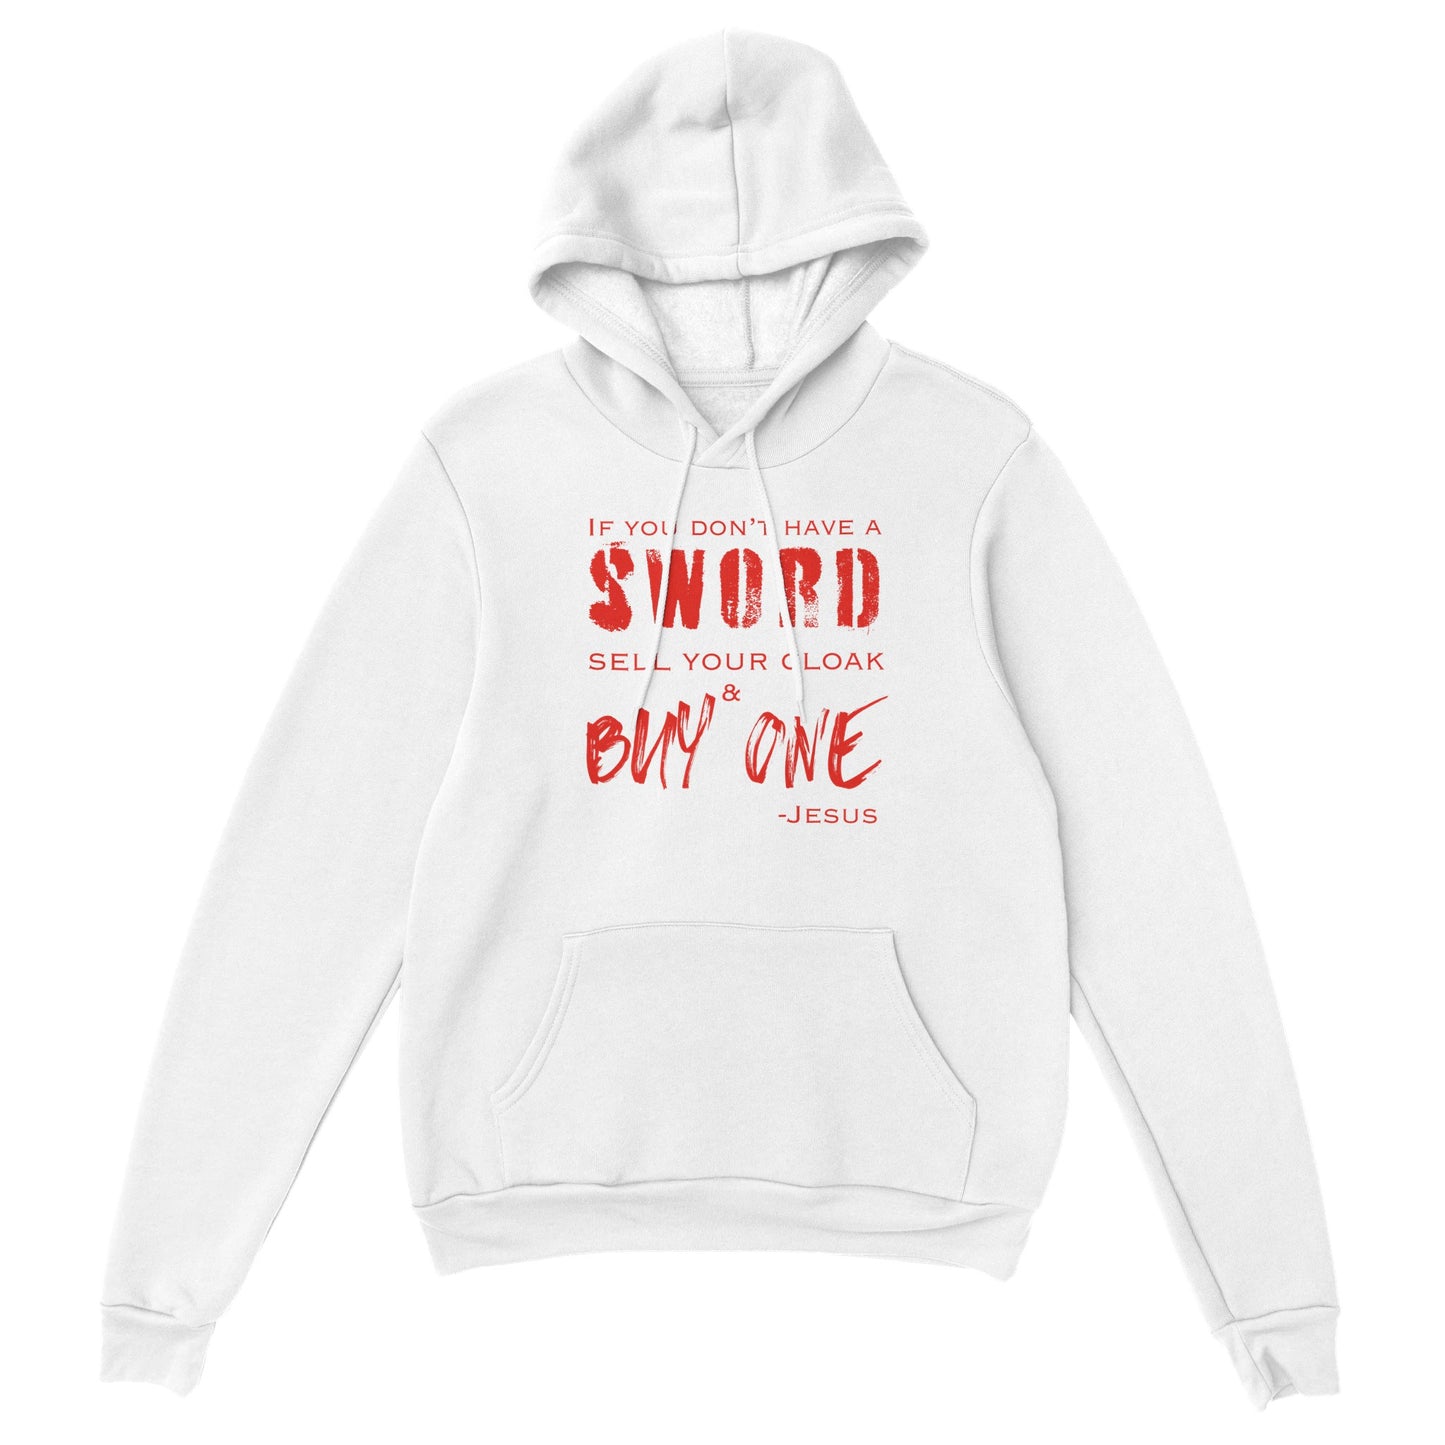 If You Don't Have a Sword - Premium Unisex Pullover Hoodie